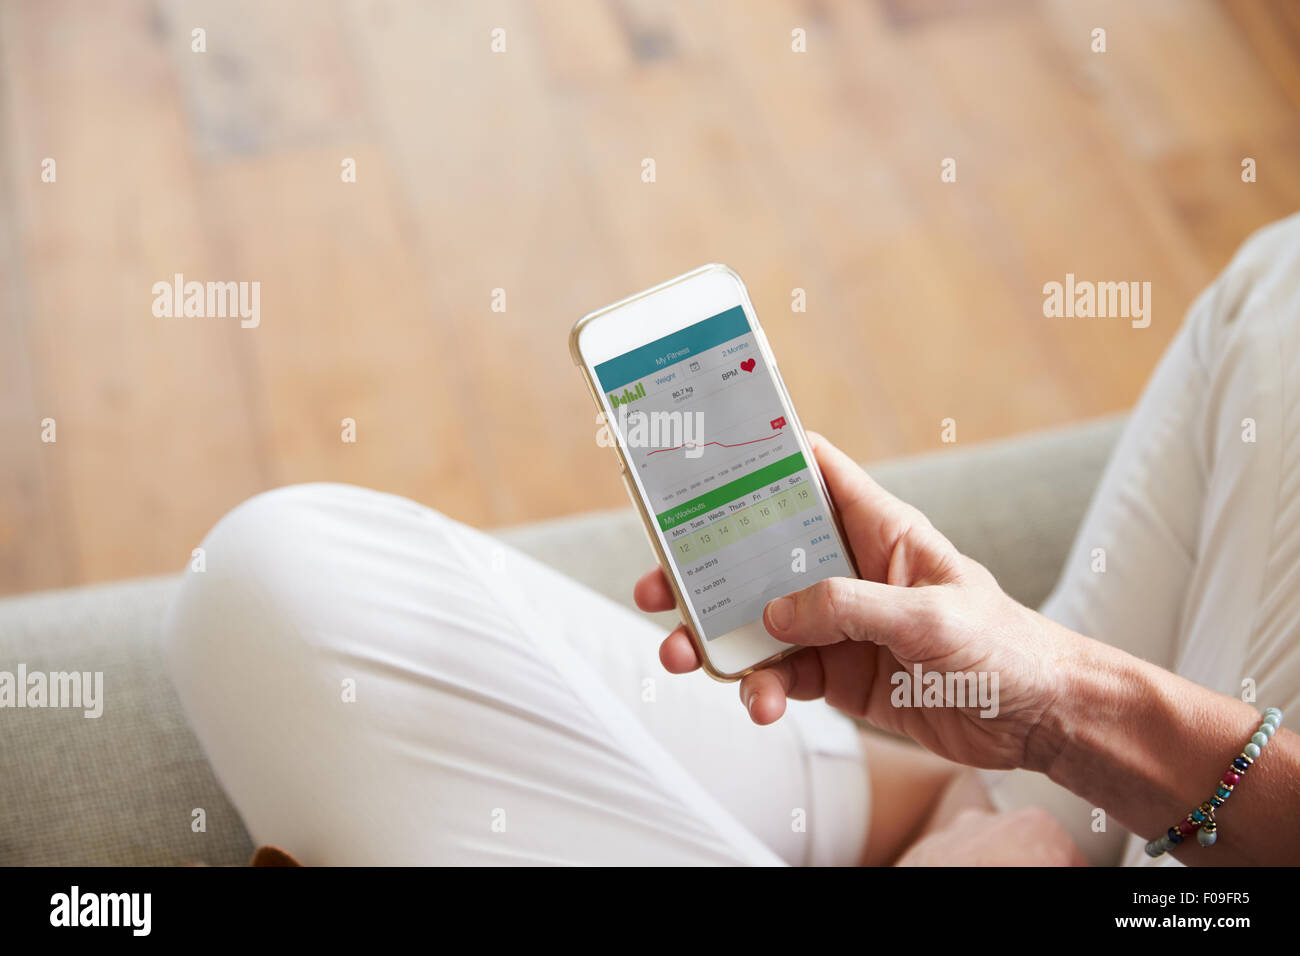 Woman Looking At Health Monitoring App On Smartphone Stock Photo